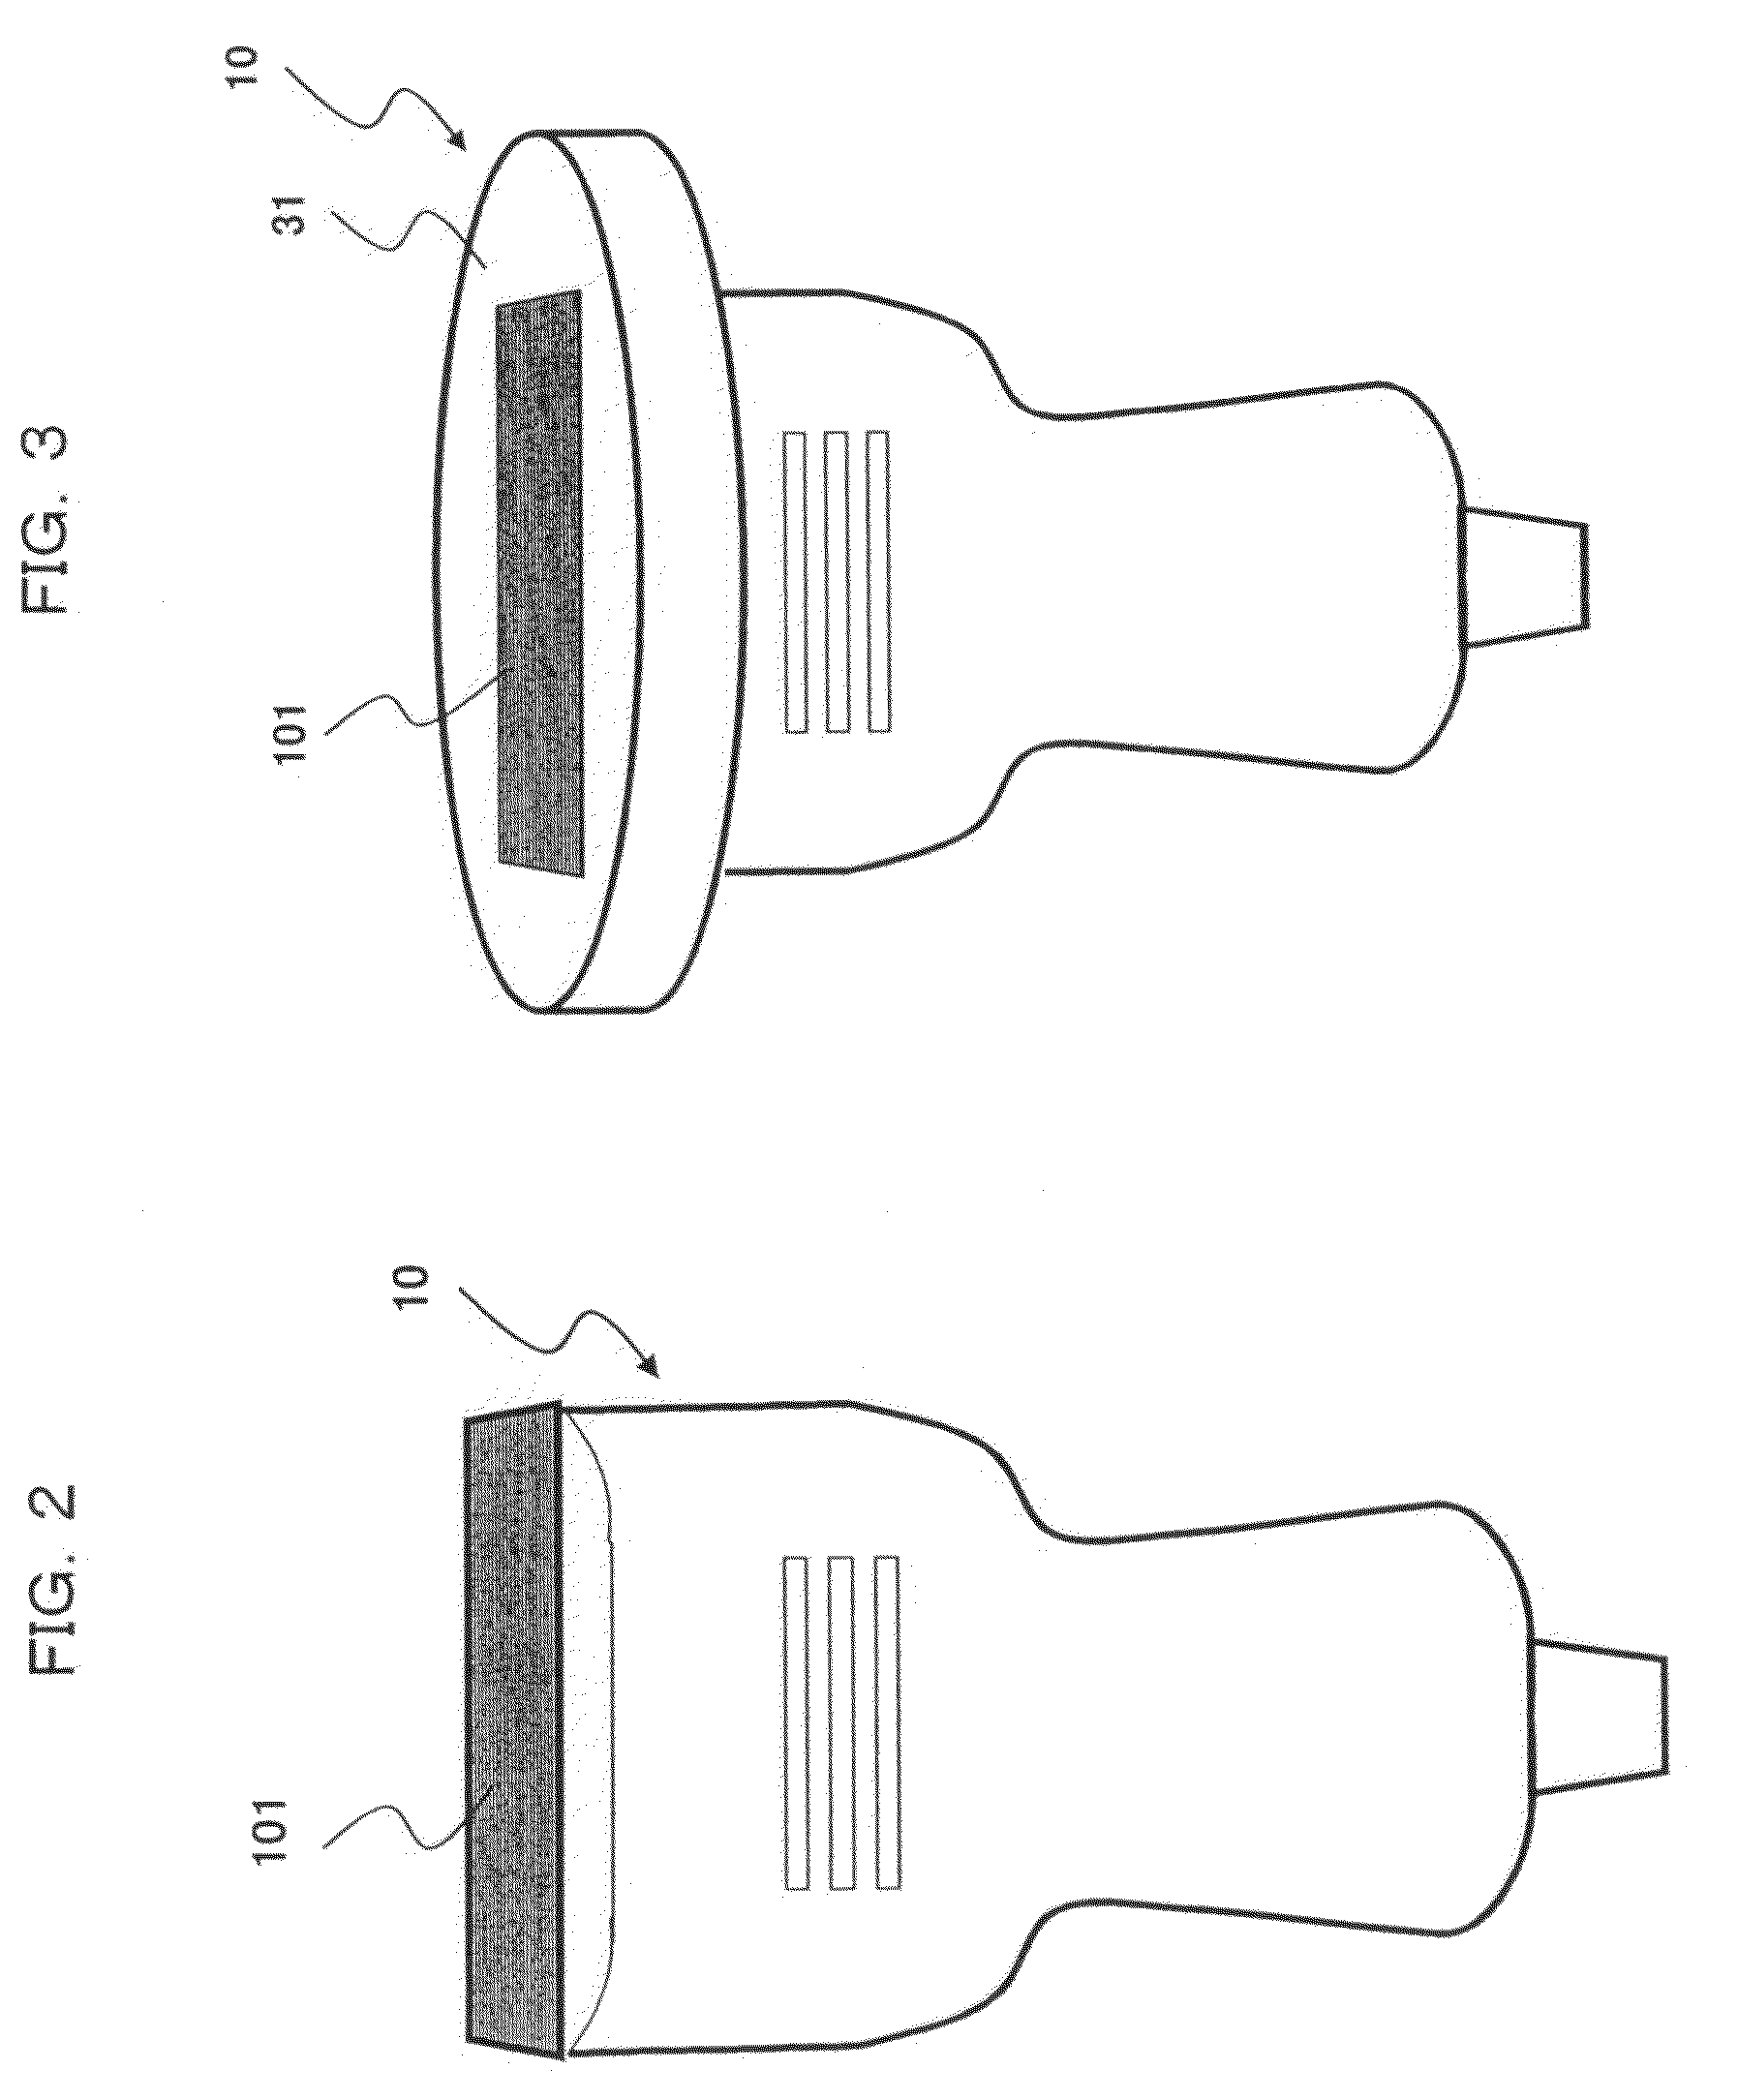 Utrasound probe and ultrasound elasticity imaging apparatus